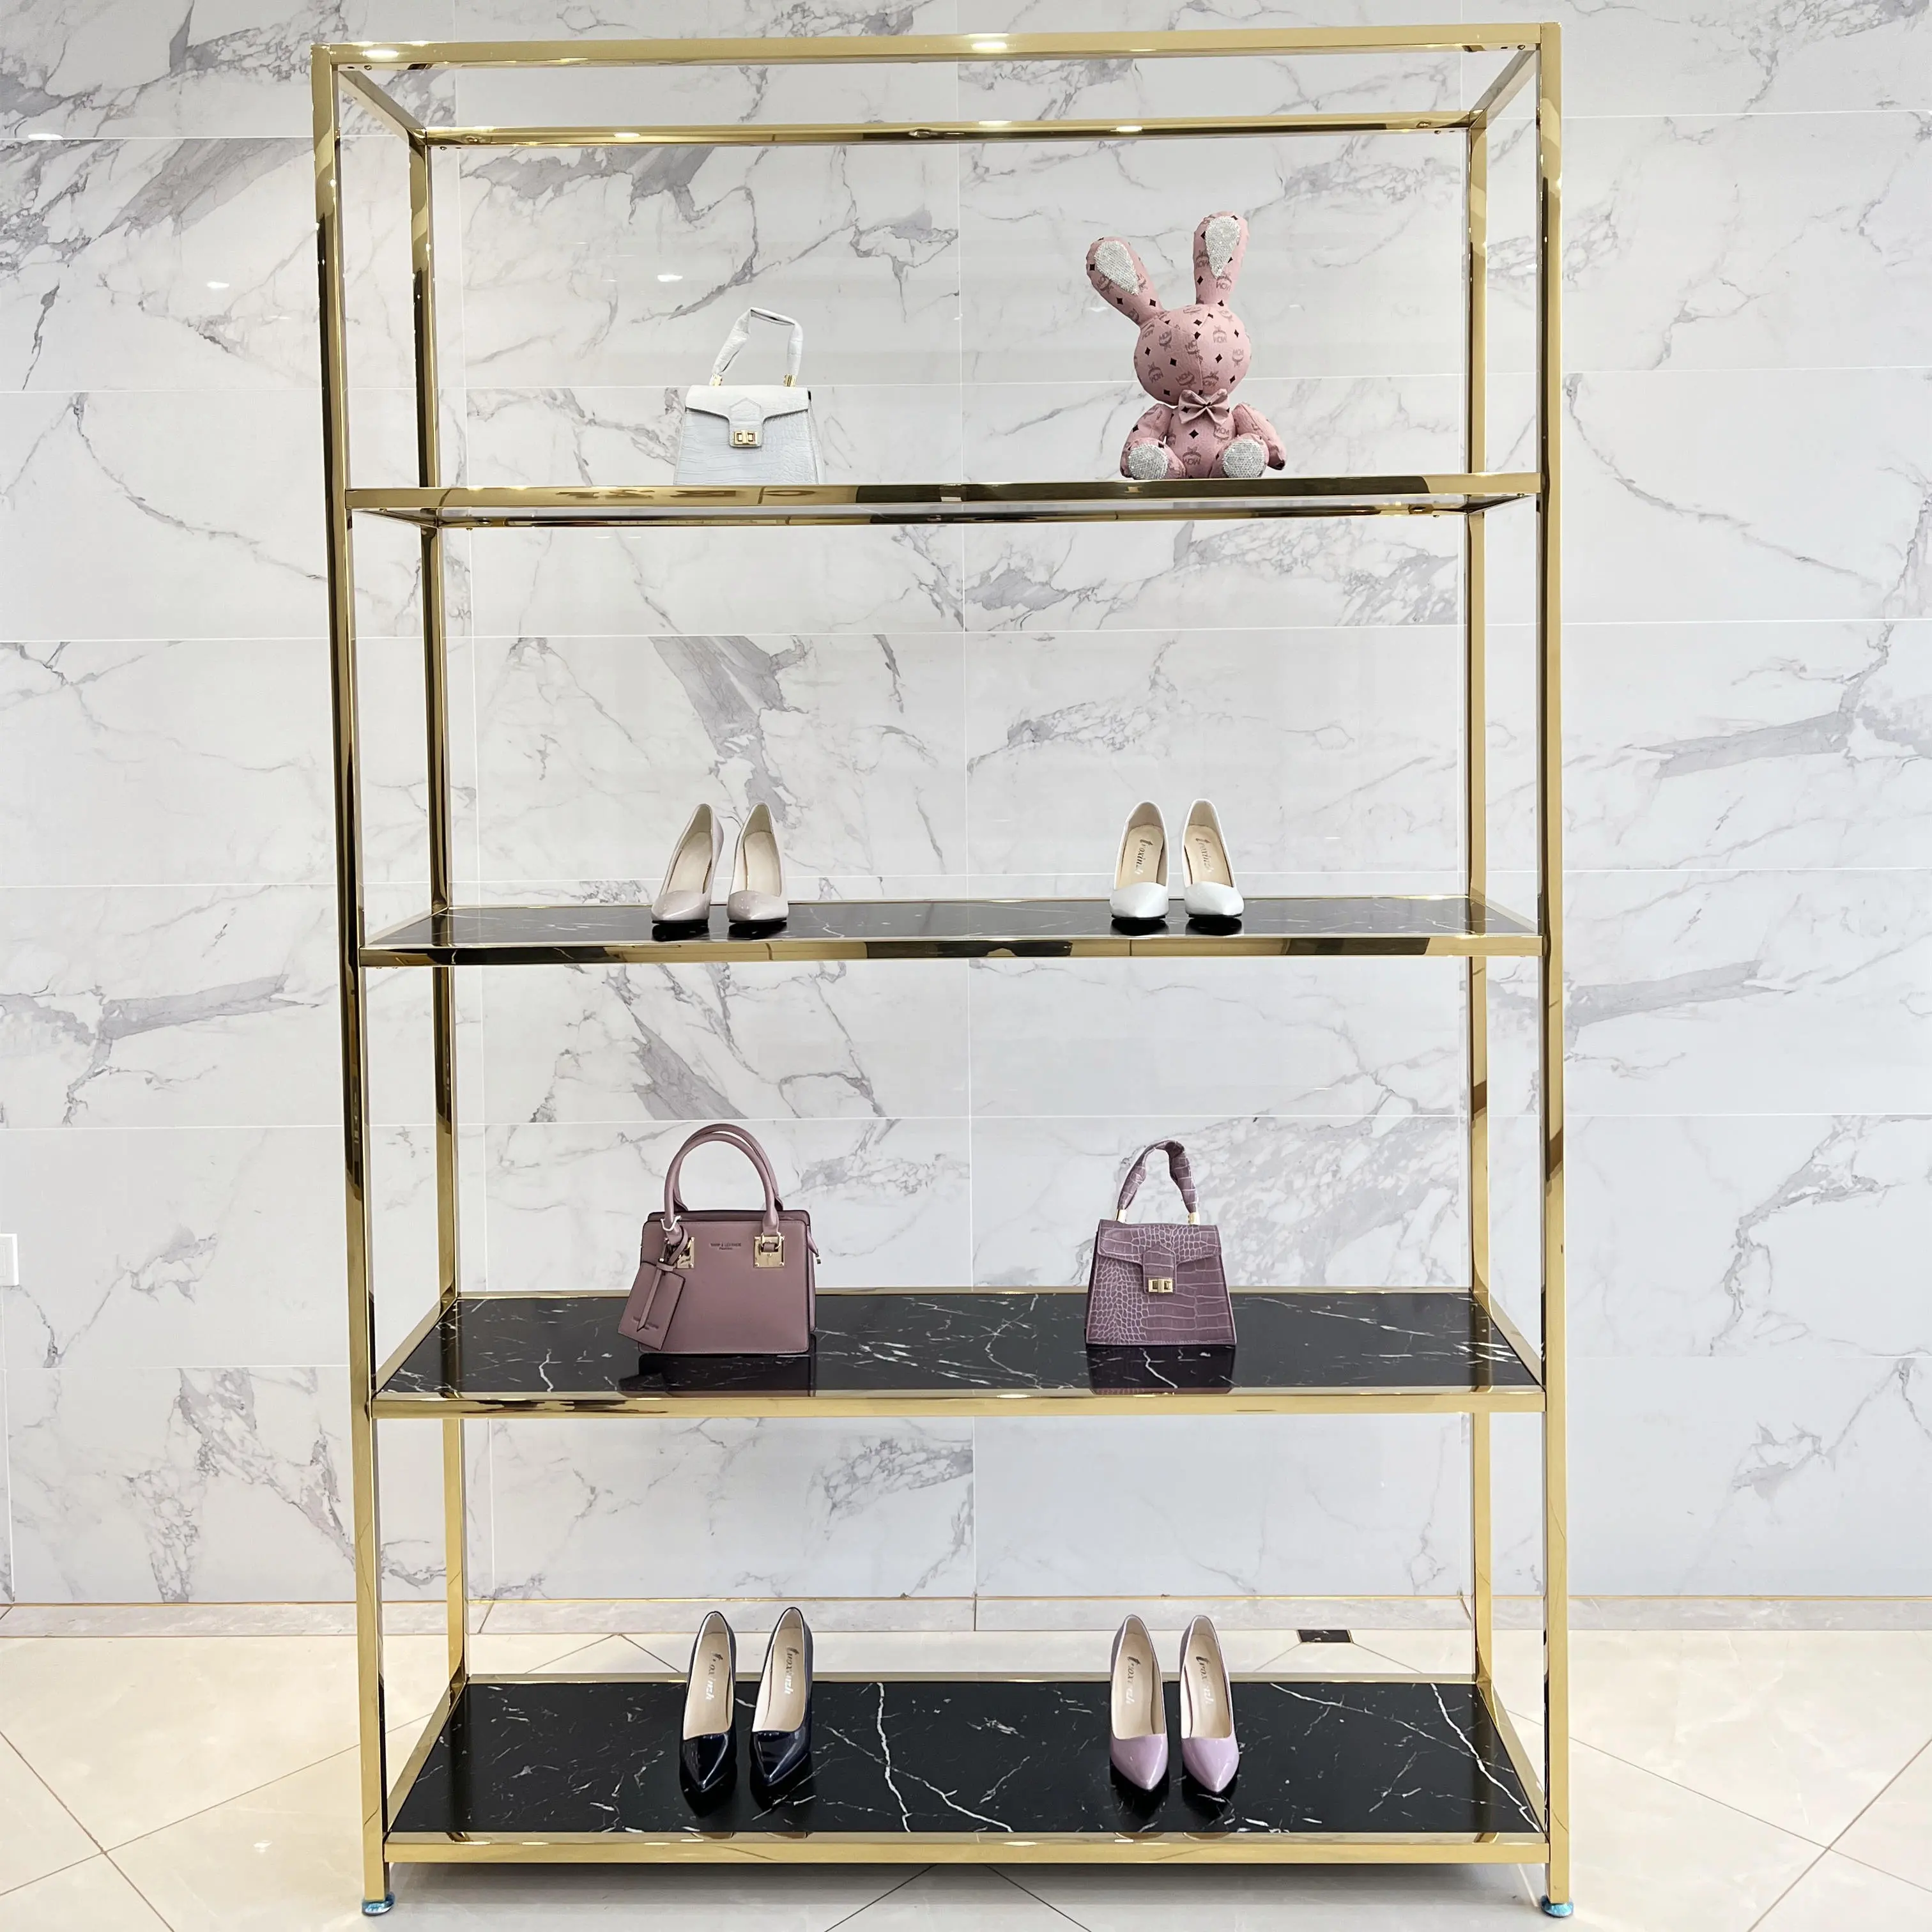 Modern Shoe Store Retail Shoe Stand Display Shelf Floor Standing Multi Layers Bags Shoes Shelves For Shop